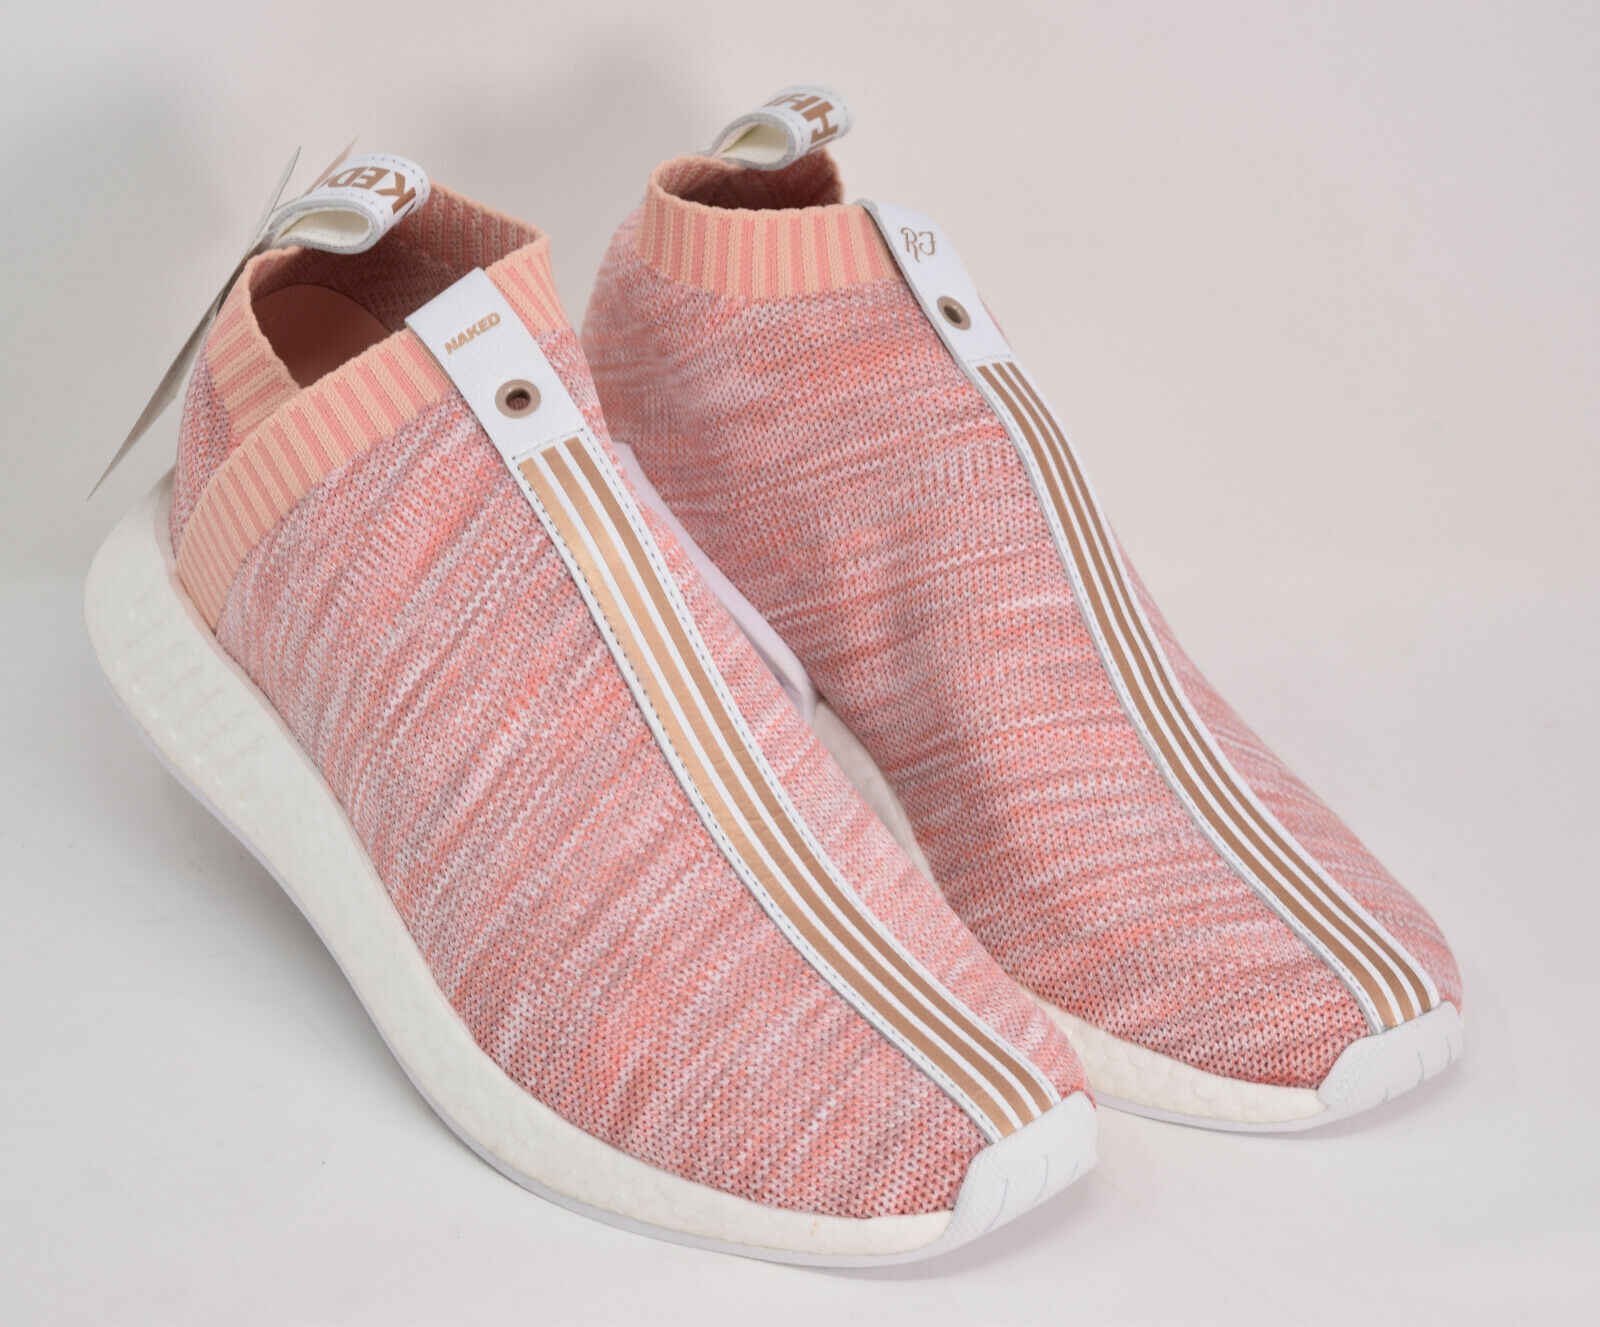 Primary image for Authenticity Guarantee 
Adidas NMD CS2 Pk S.E. Kith x Naked BY2596 NIB 11.5 US